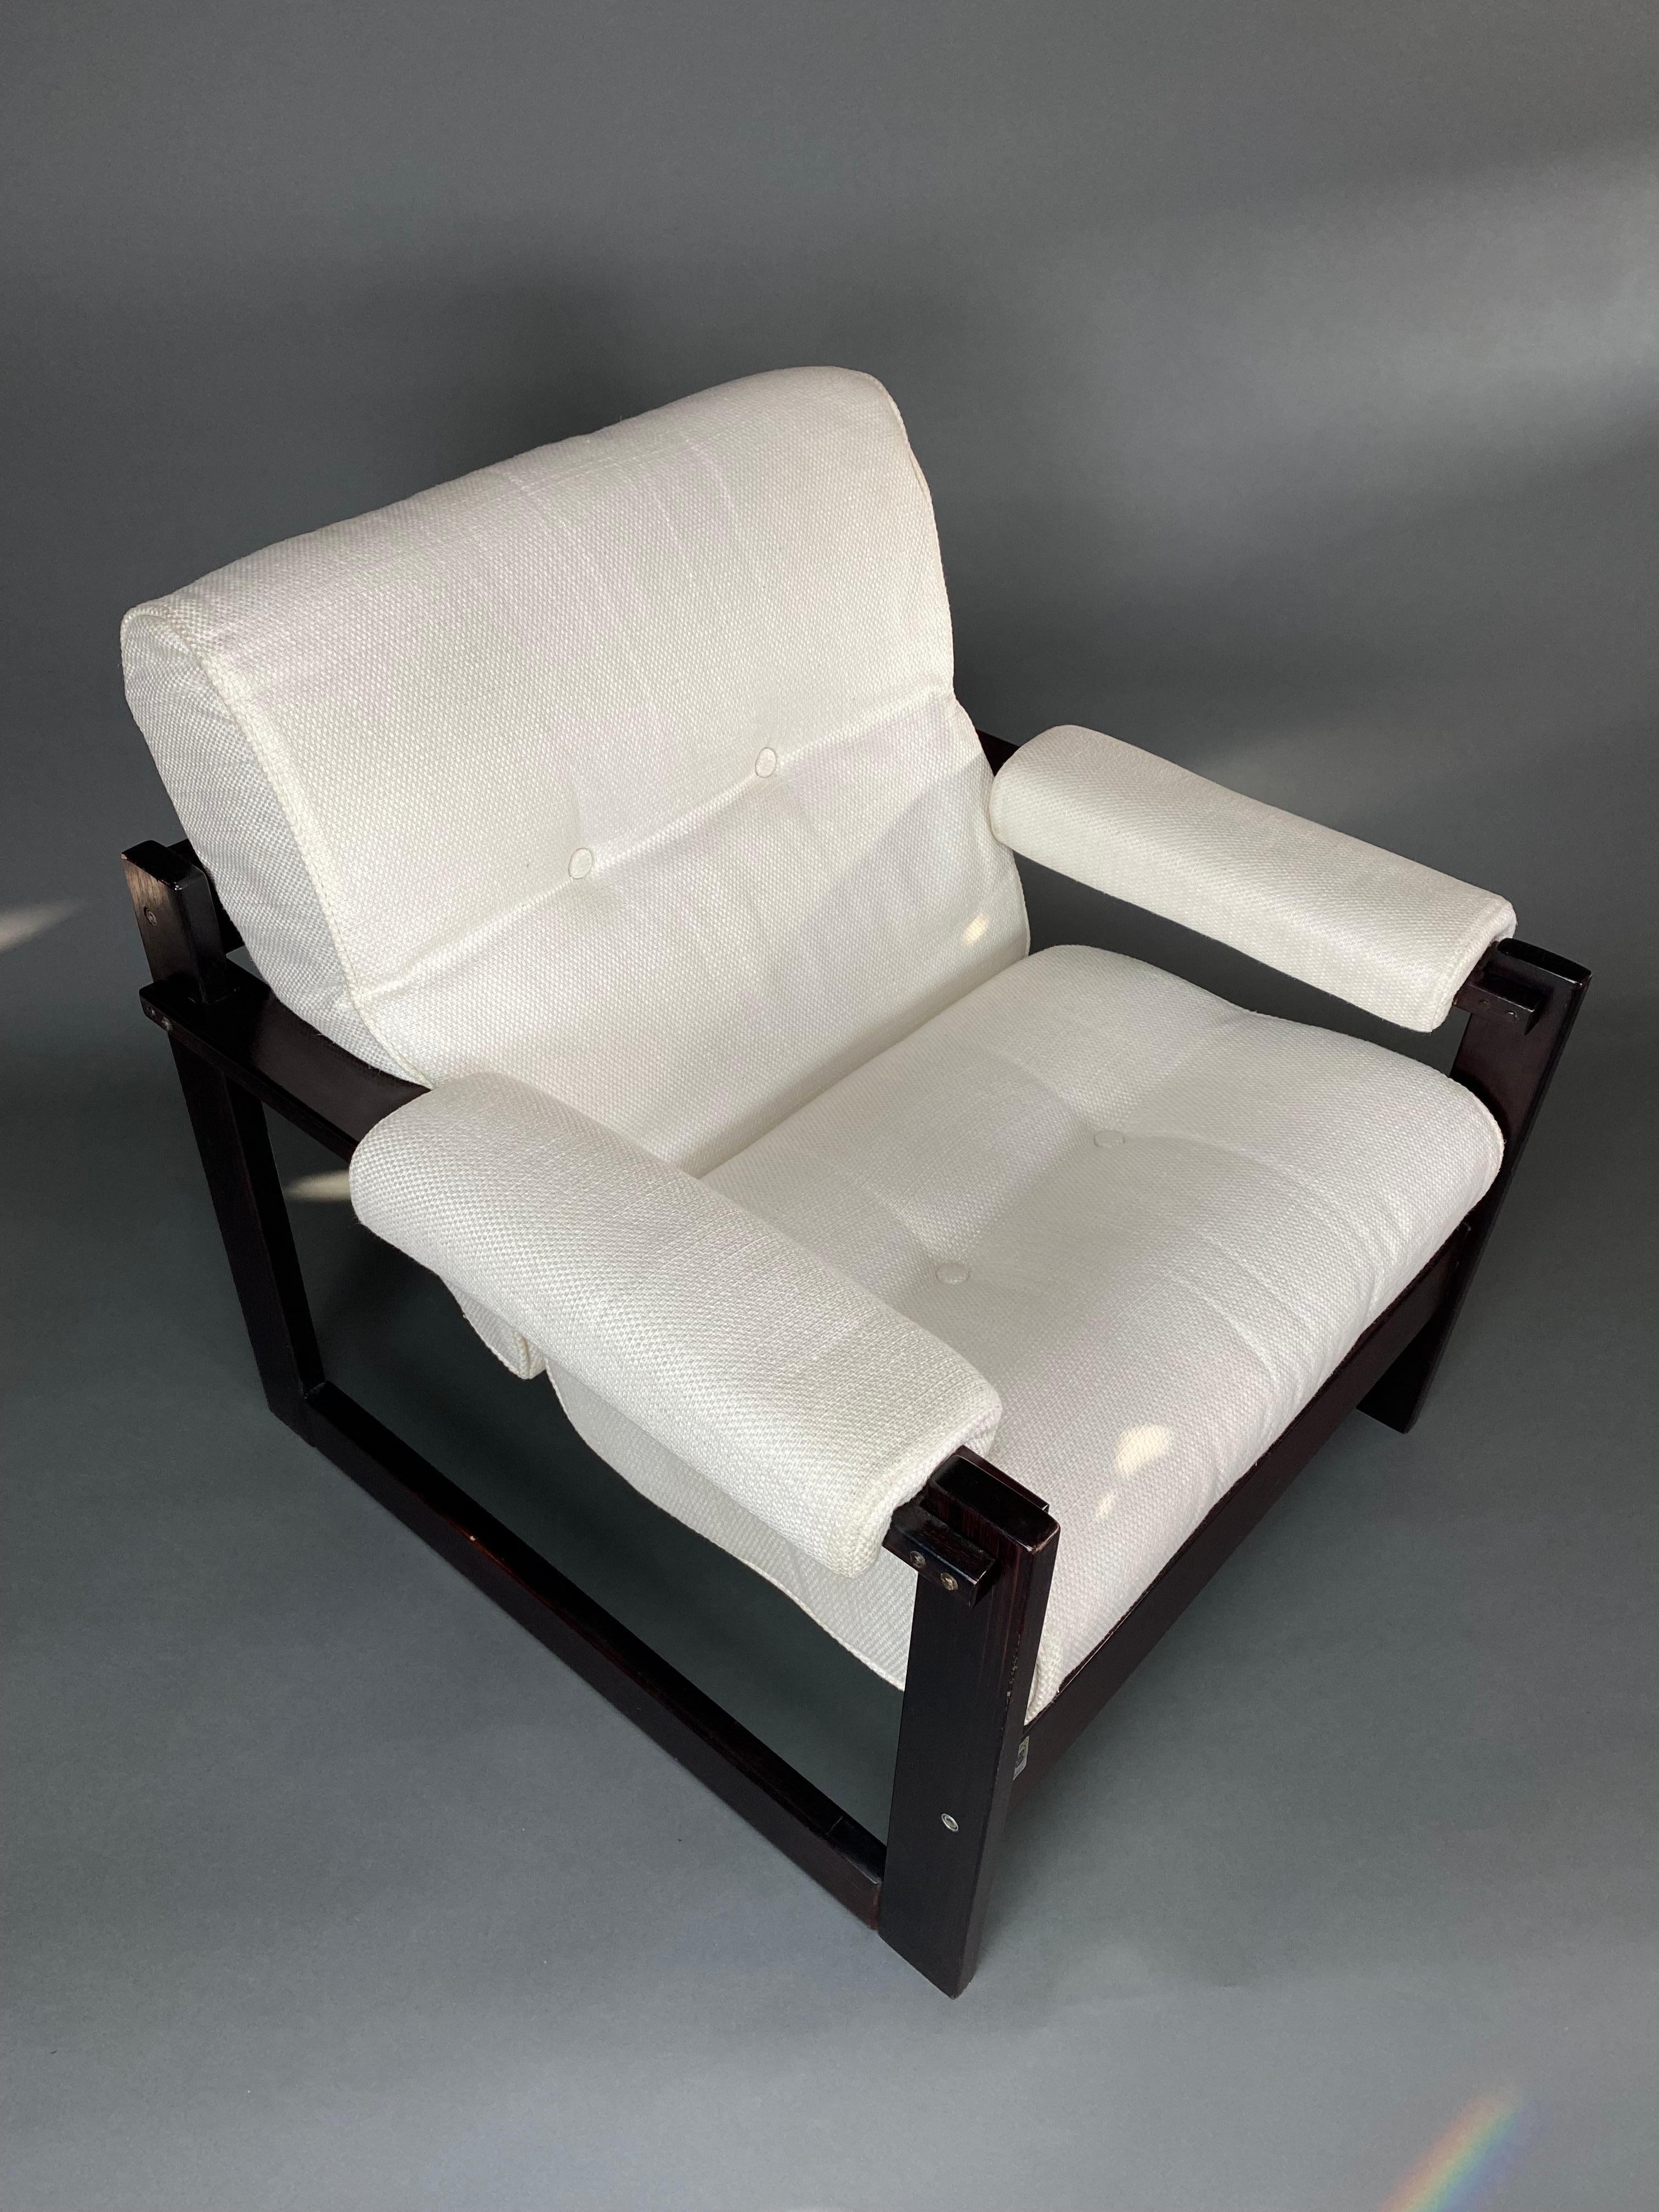 Brazilian Percival Lafer Mid-Century Modern Lounge Chairs For Sale